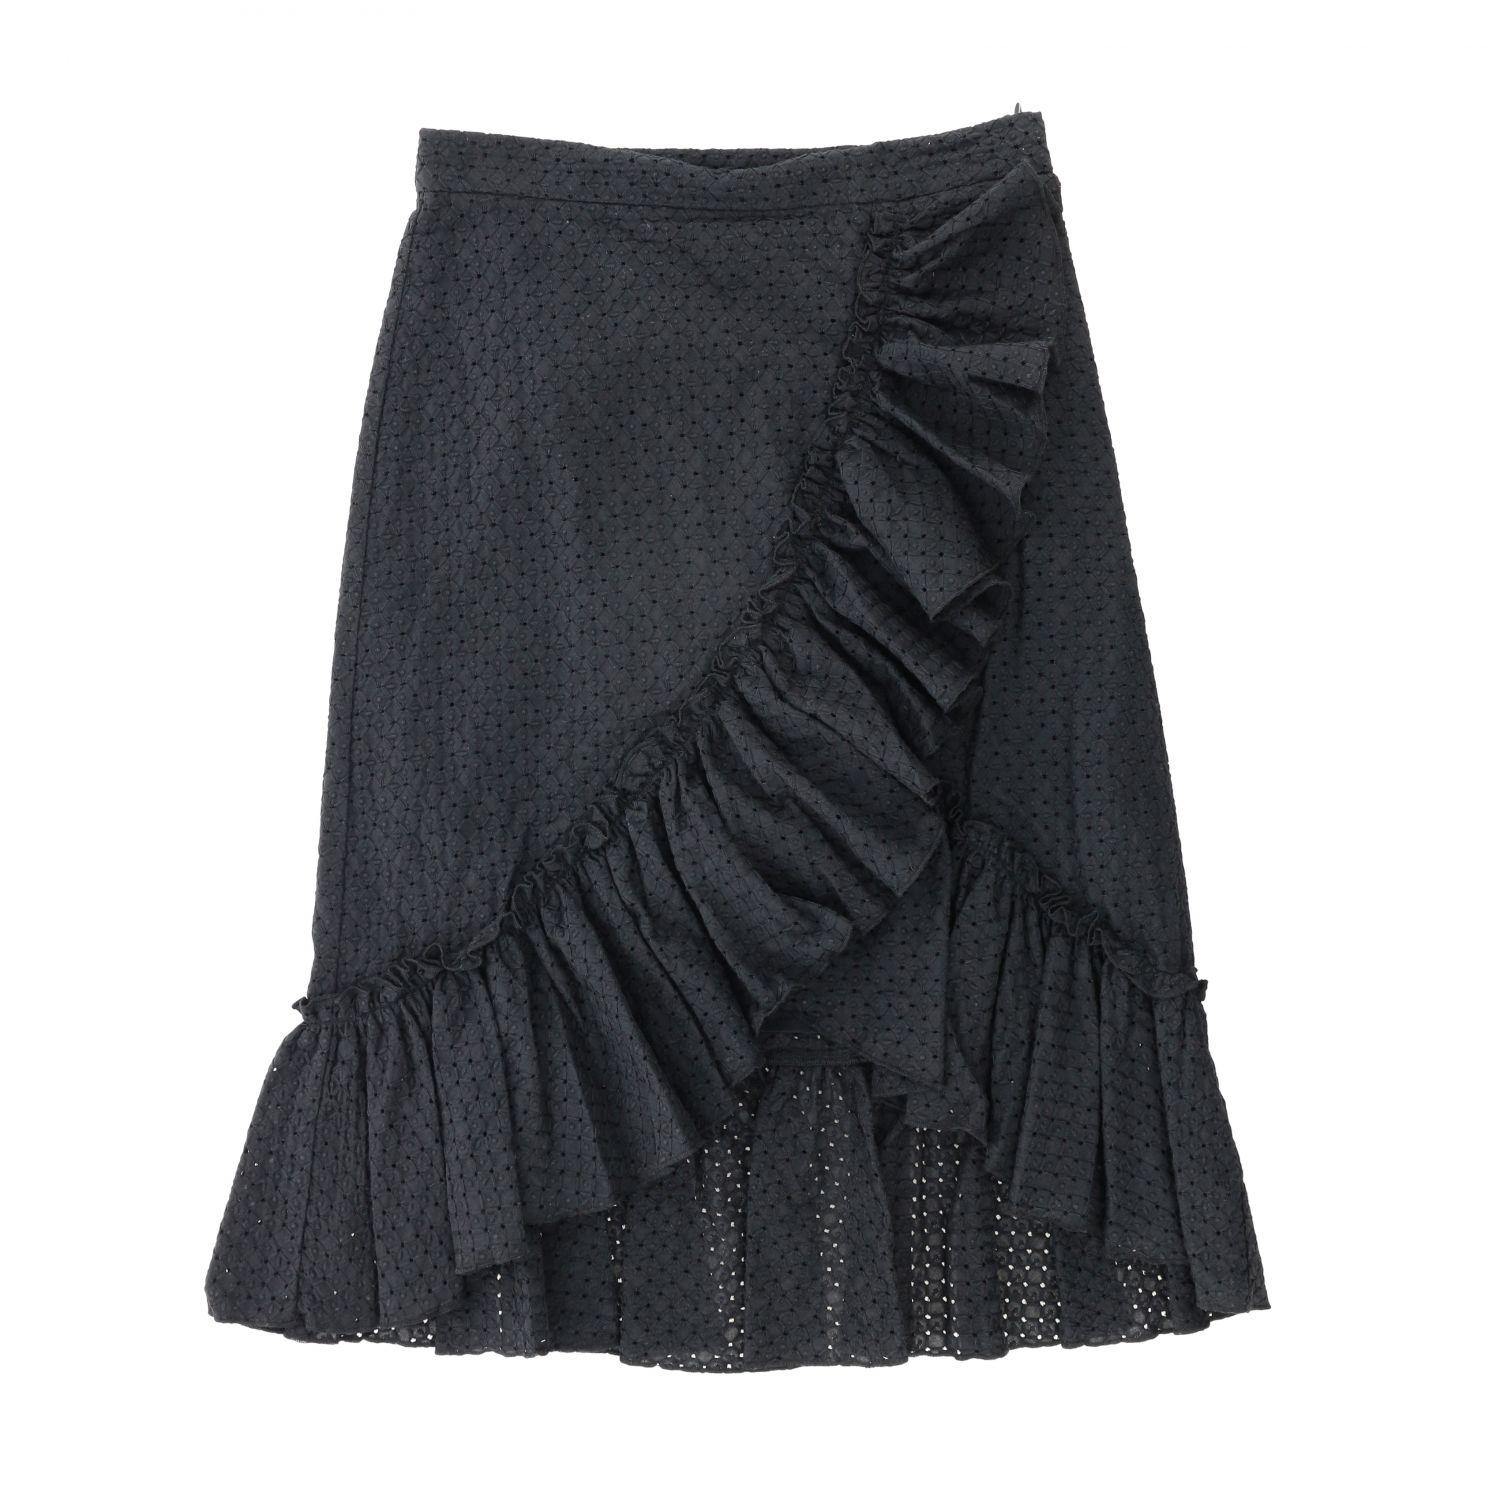 Monnalisa Outlet: skirt in hand-woven cotton with ruffles - Black ...